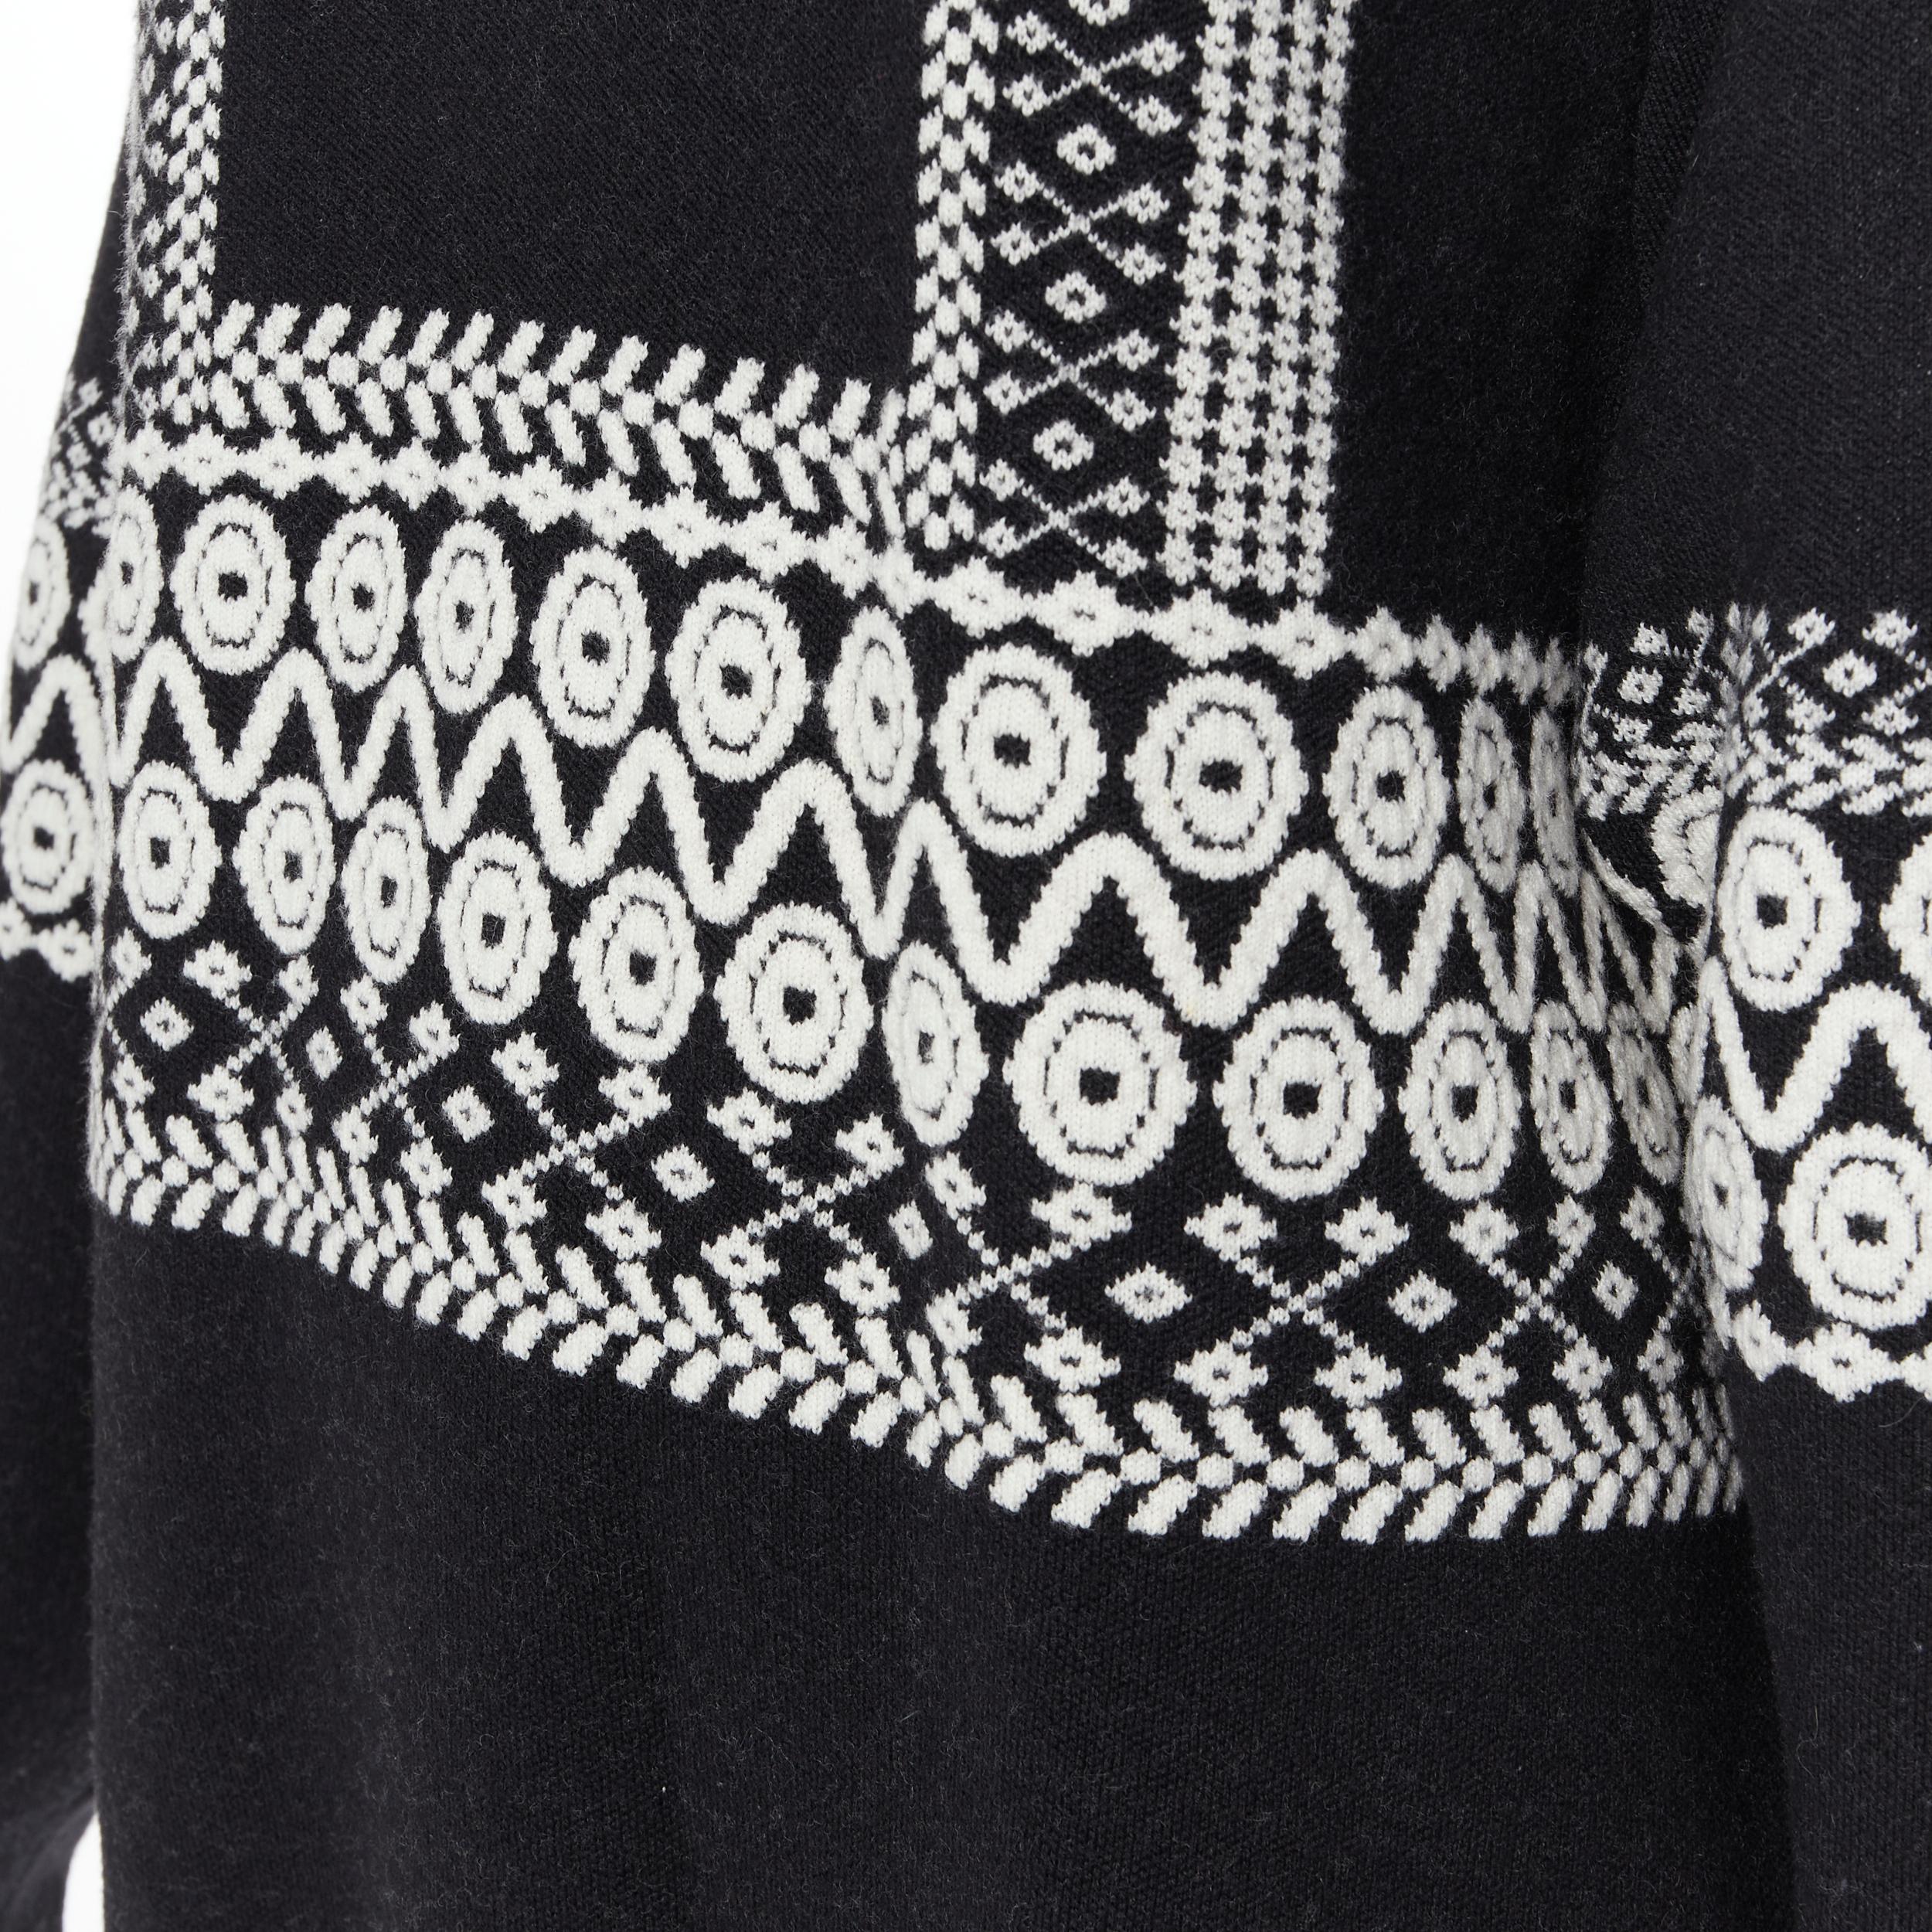 CHLOE 100% wool black white intarsia woven long sleeve sweater pullover XS 
Reference: TGAS/B00737 
Brand: Chloe 
Material: Wool 
Color: Black 
Pattern: Solid 
Extra Detail: Oversized long length fit. 
Made in: Italy 

CONDITION: 
Condition: